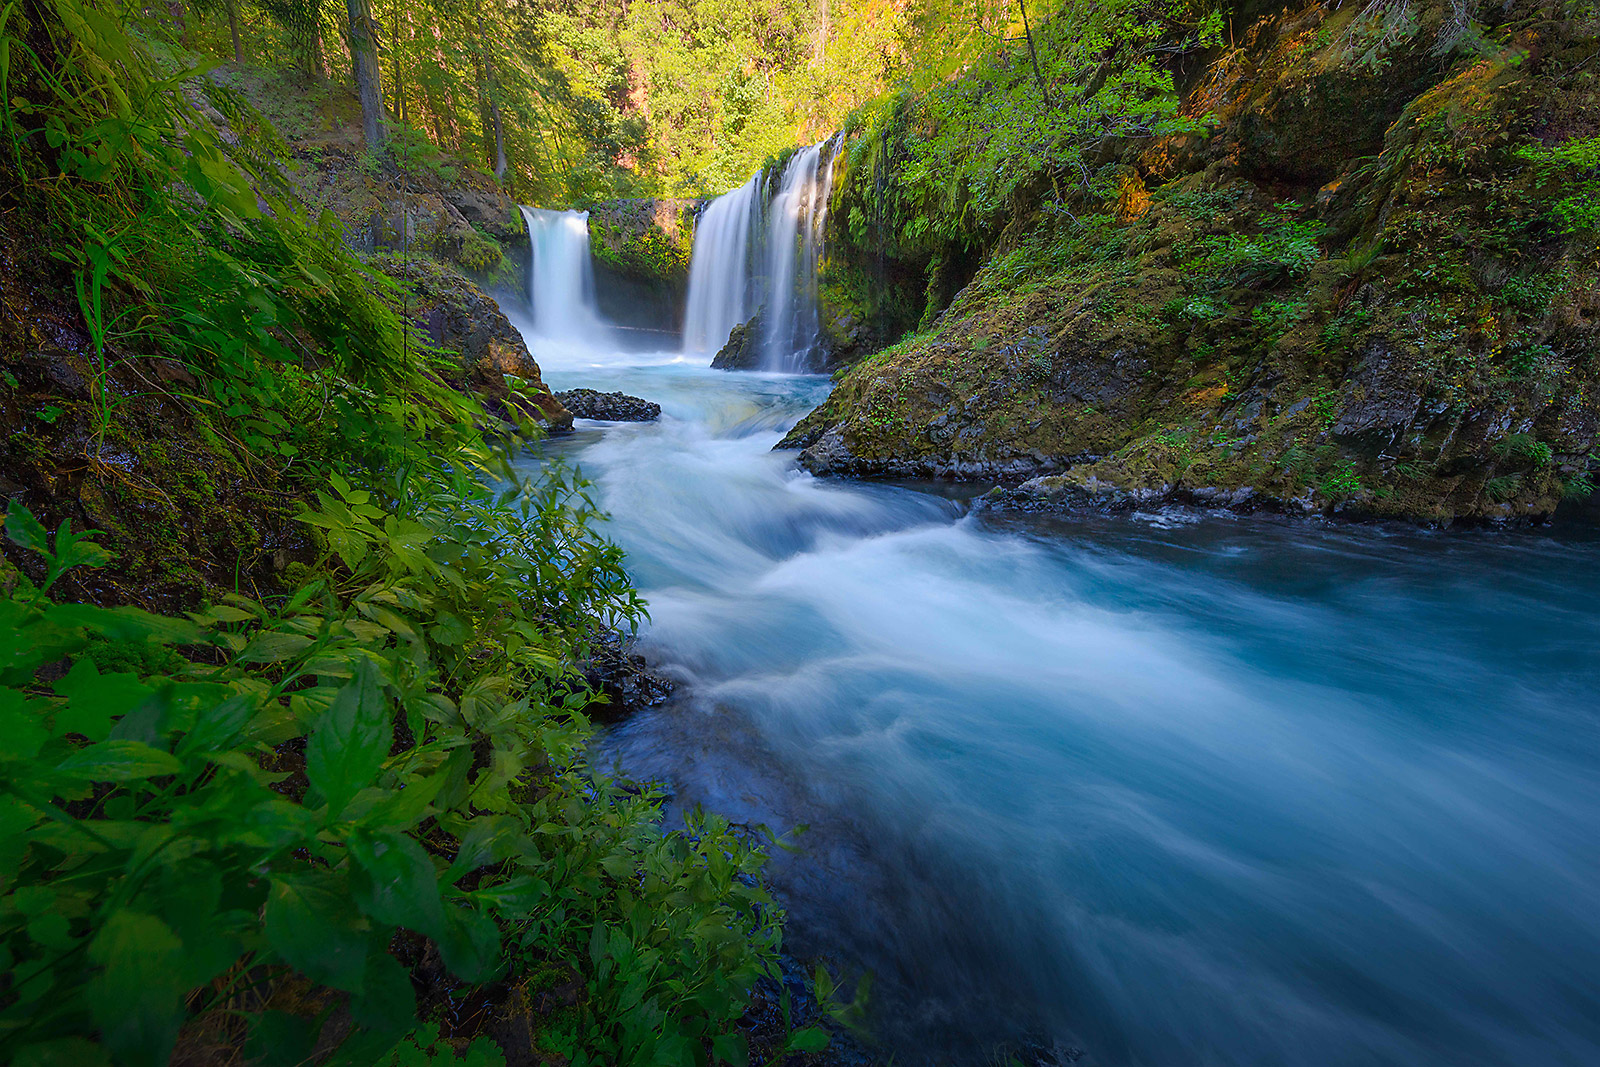 Washington, USA
Some of the more beautiful waterfalls you can find in the States happen to reside in the state of Washington 